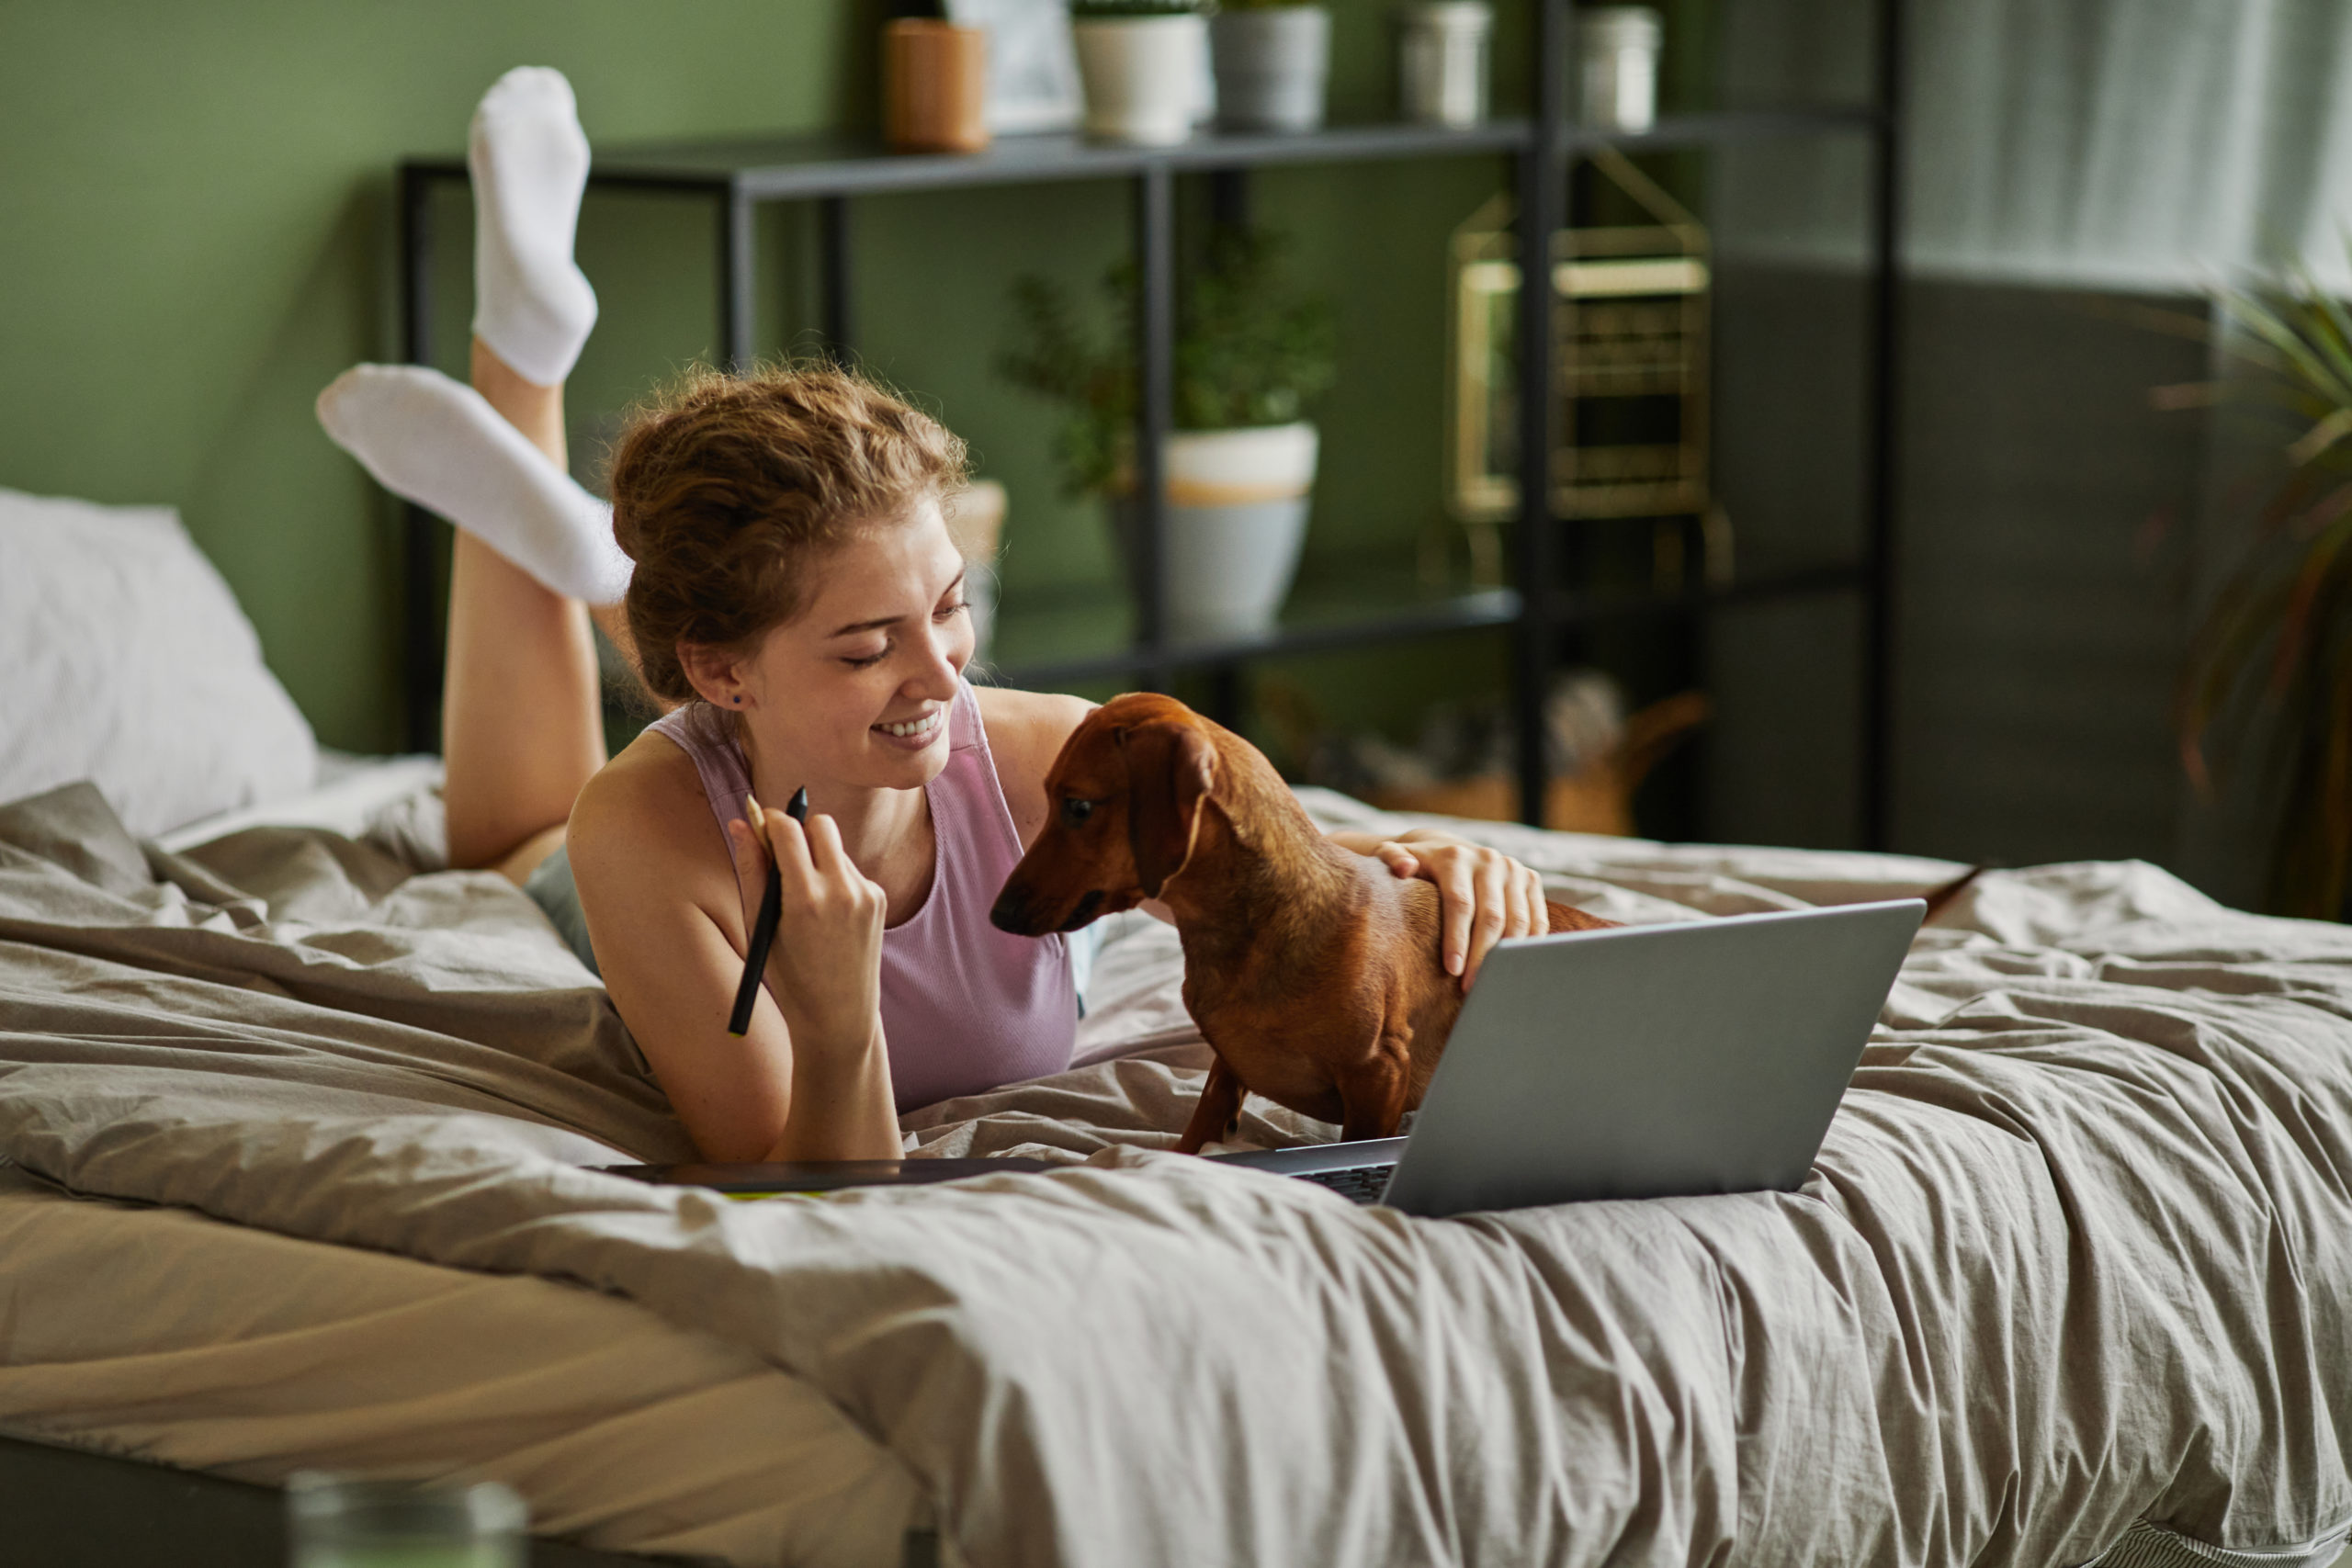 woman on her laptop with her dog